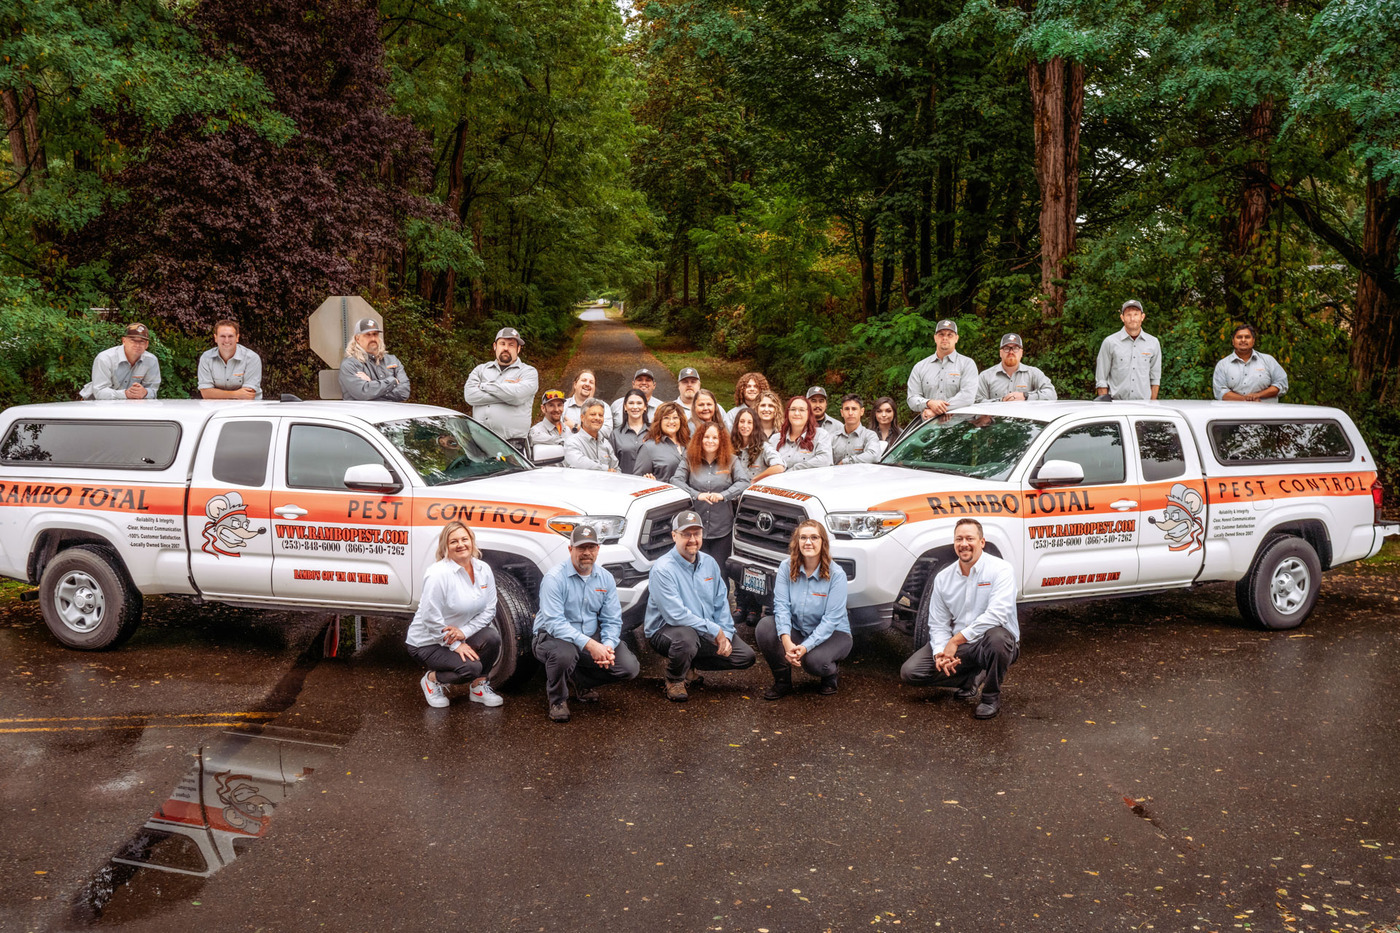 Founded by Luke and Tera Rambo, Rambo Total Pest Control has been a leader in pest management in the Pacific Northwest for over a decade.